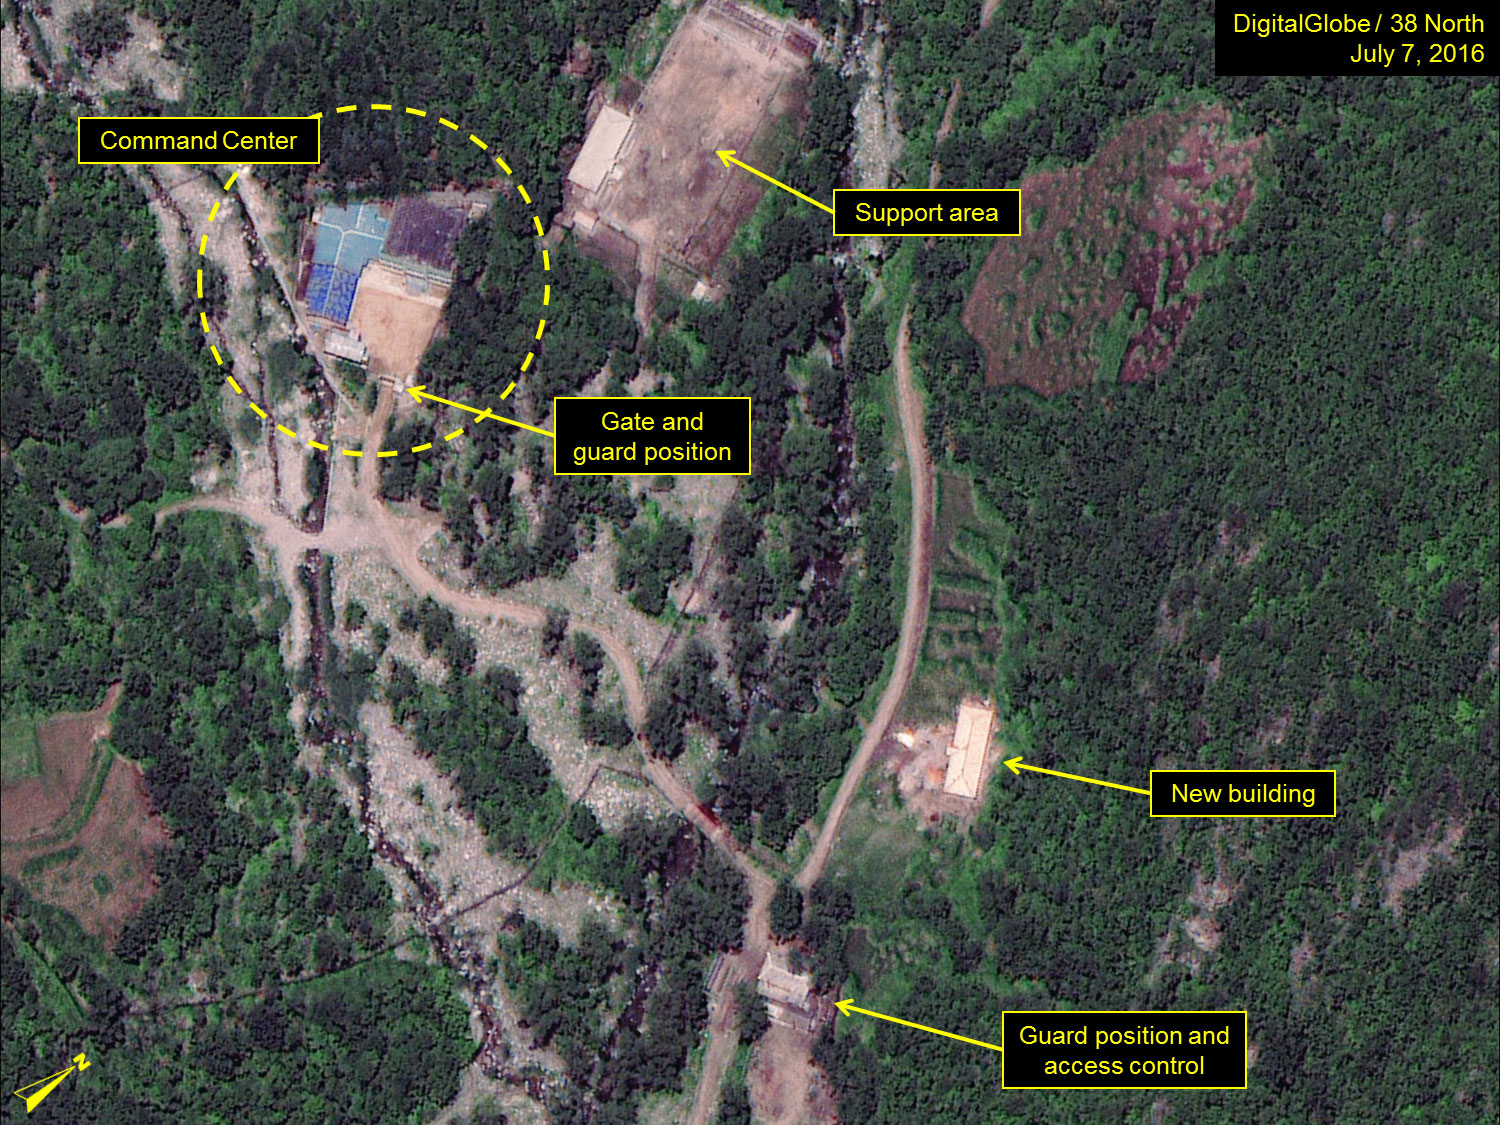 North Korea: High Level of Activity at Nuclear Test Site Portal but Purpose is Unclear